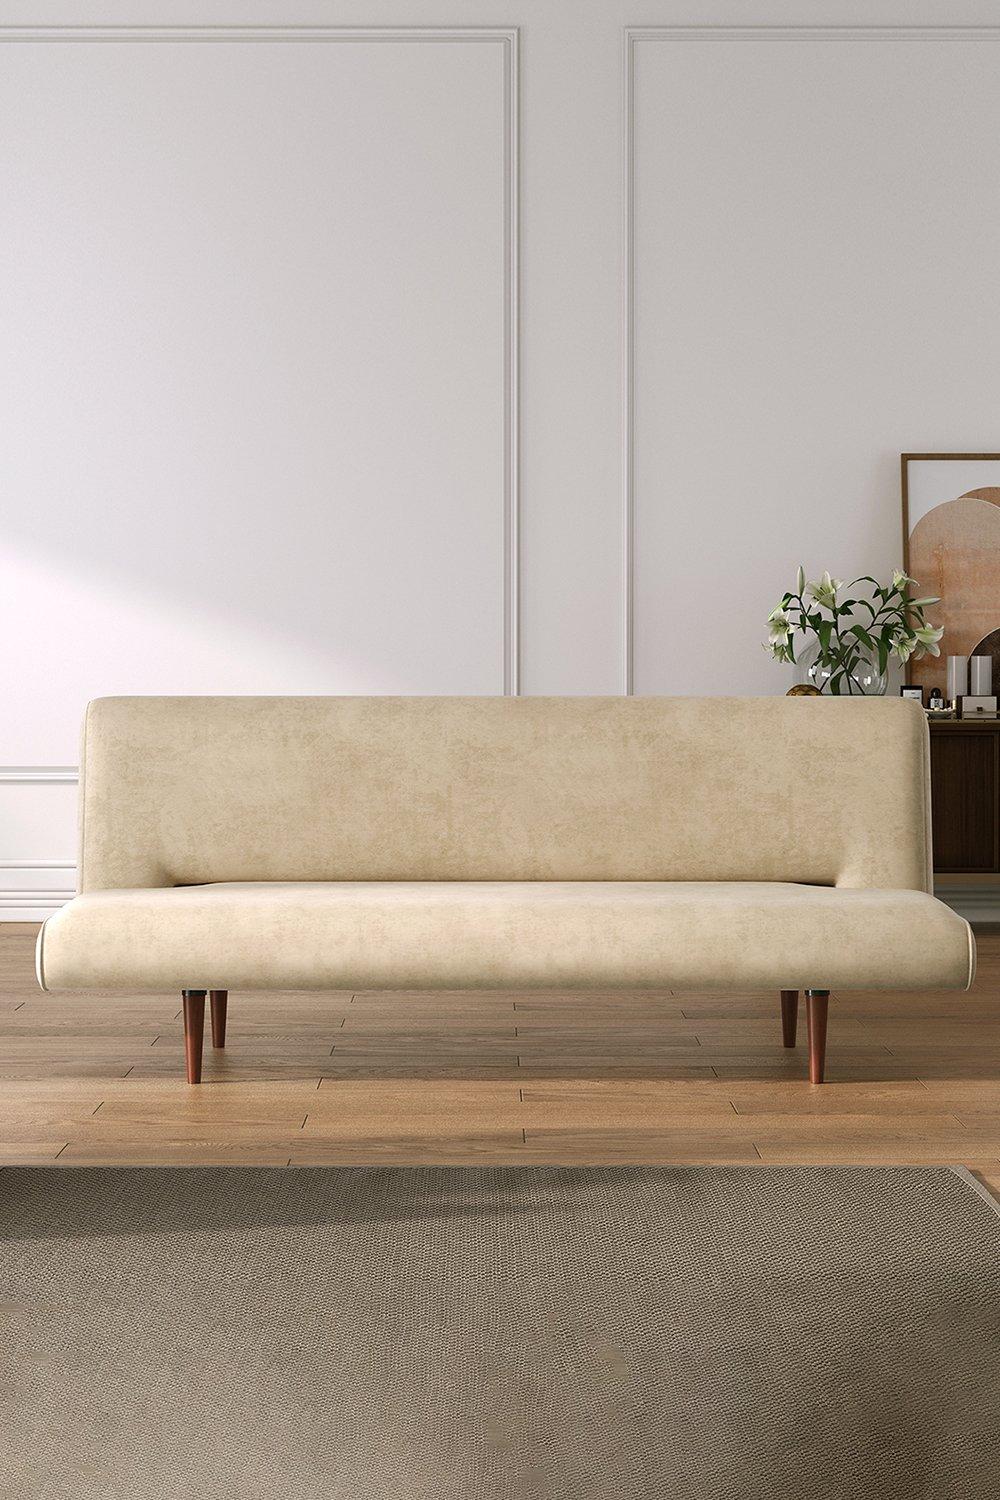 3 Seater Upholstered Sofa Bed with Wood Legs